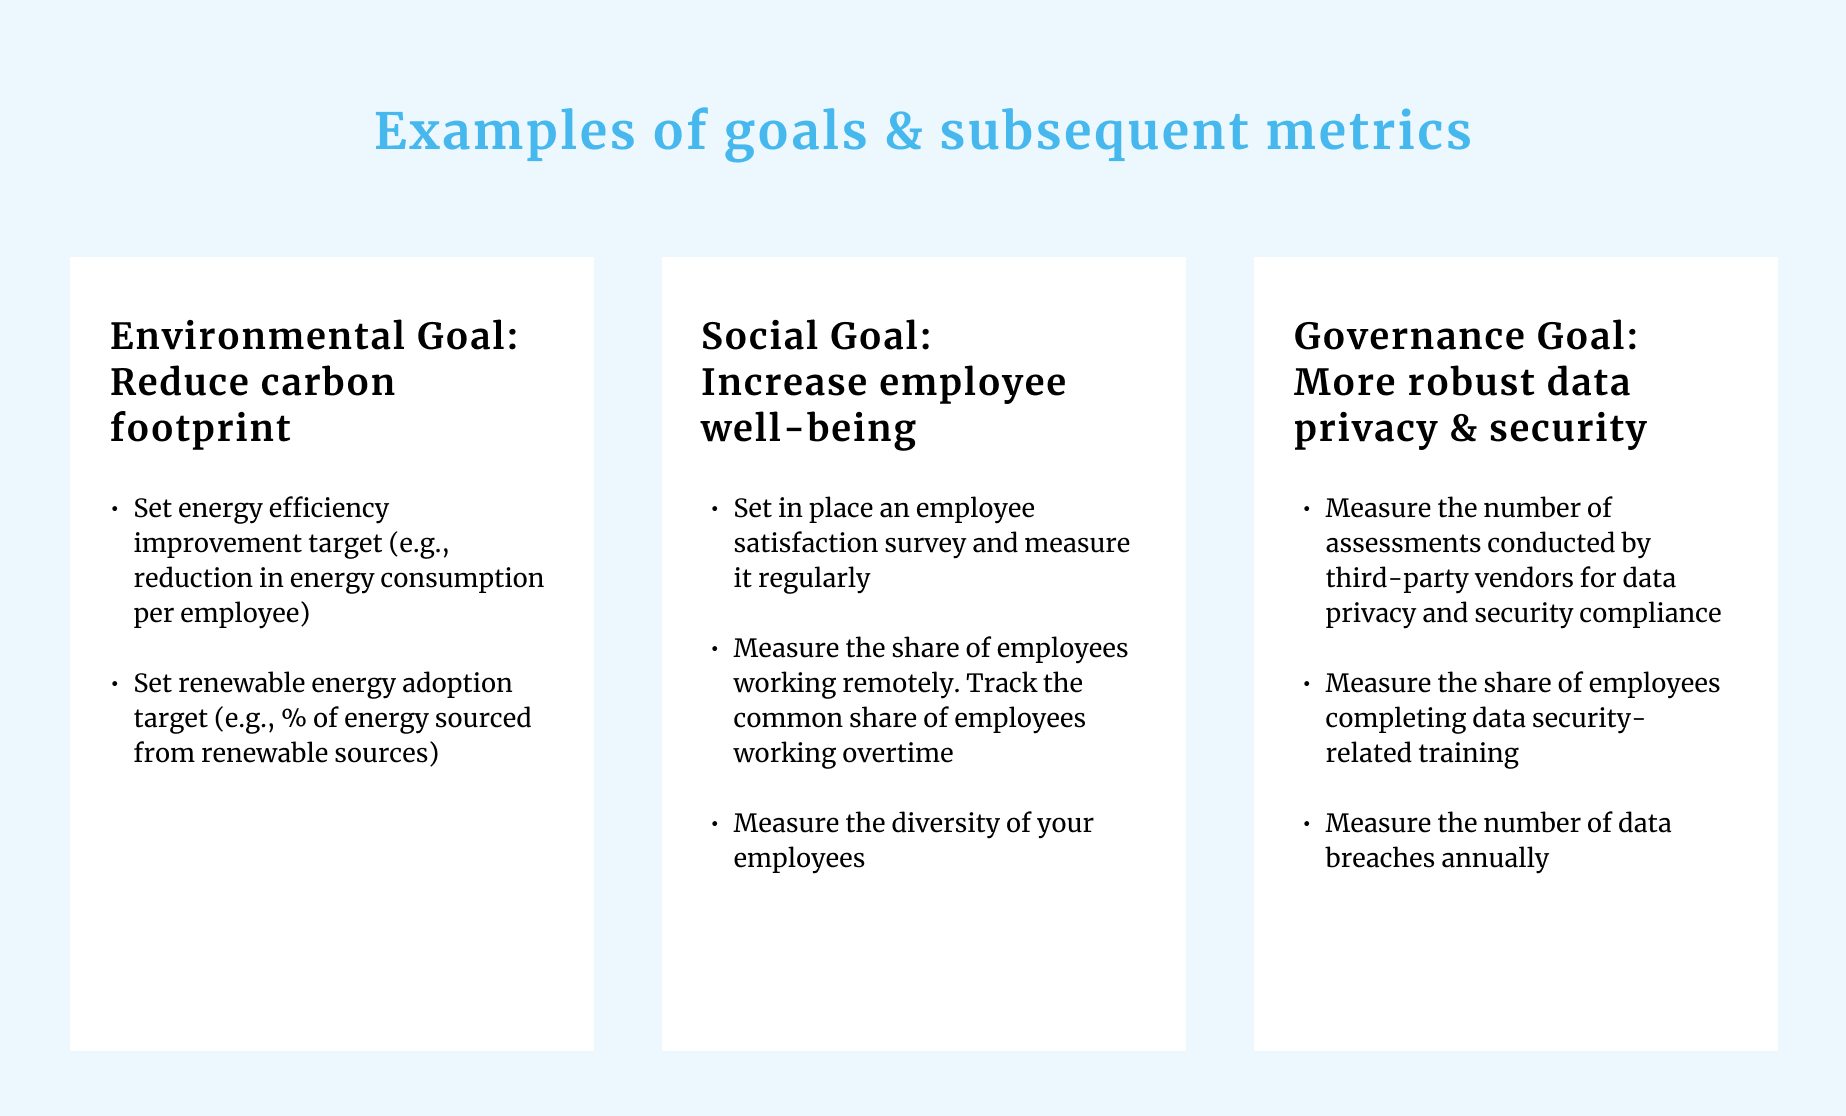 Examples of goals and subsequent metrics